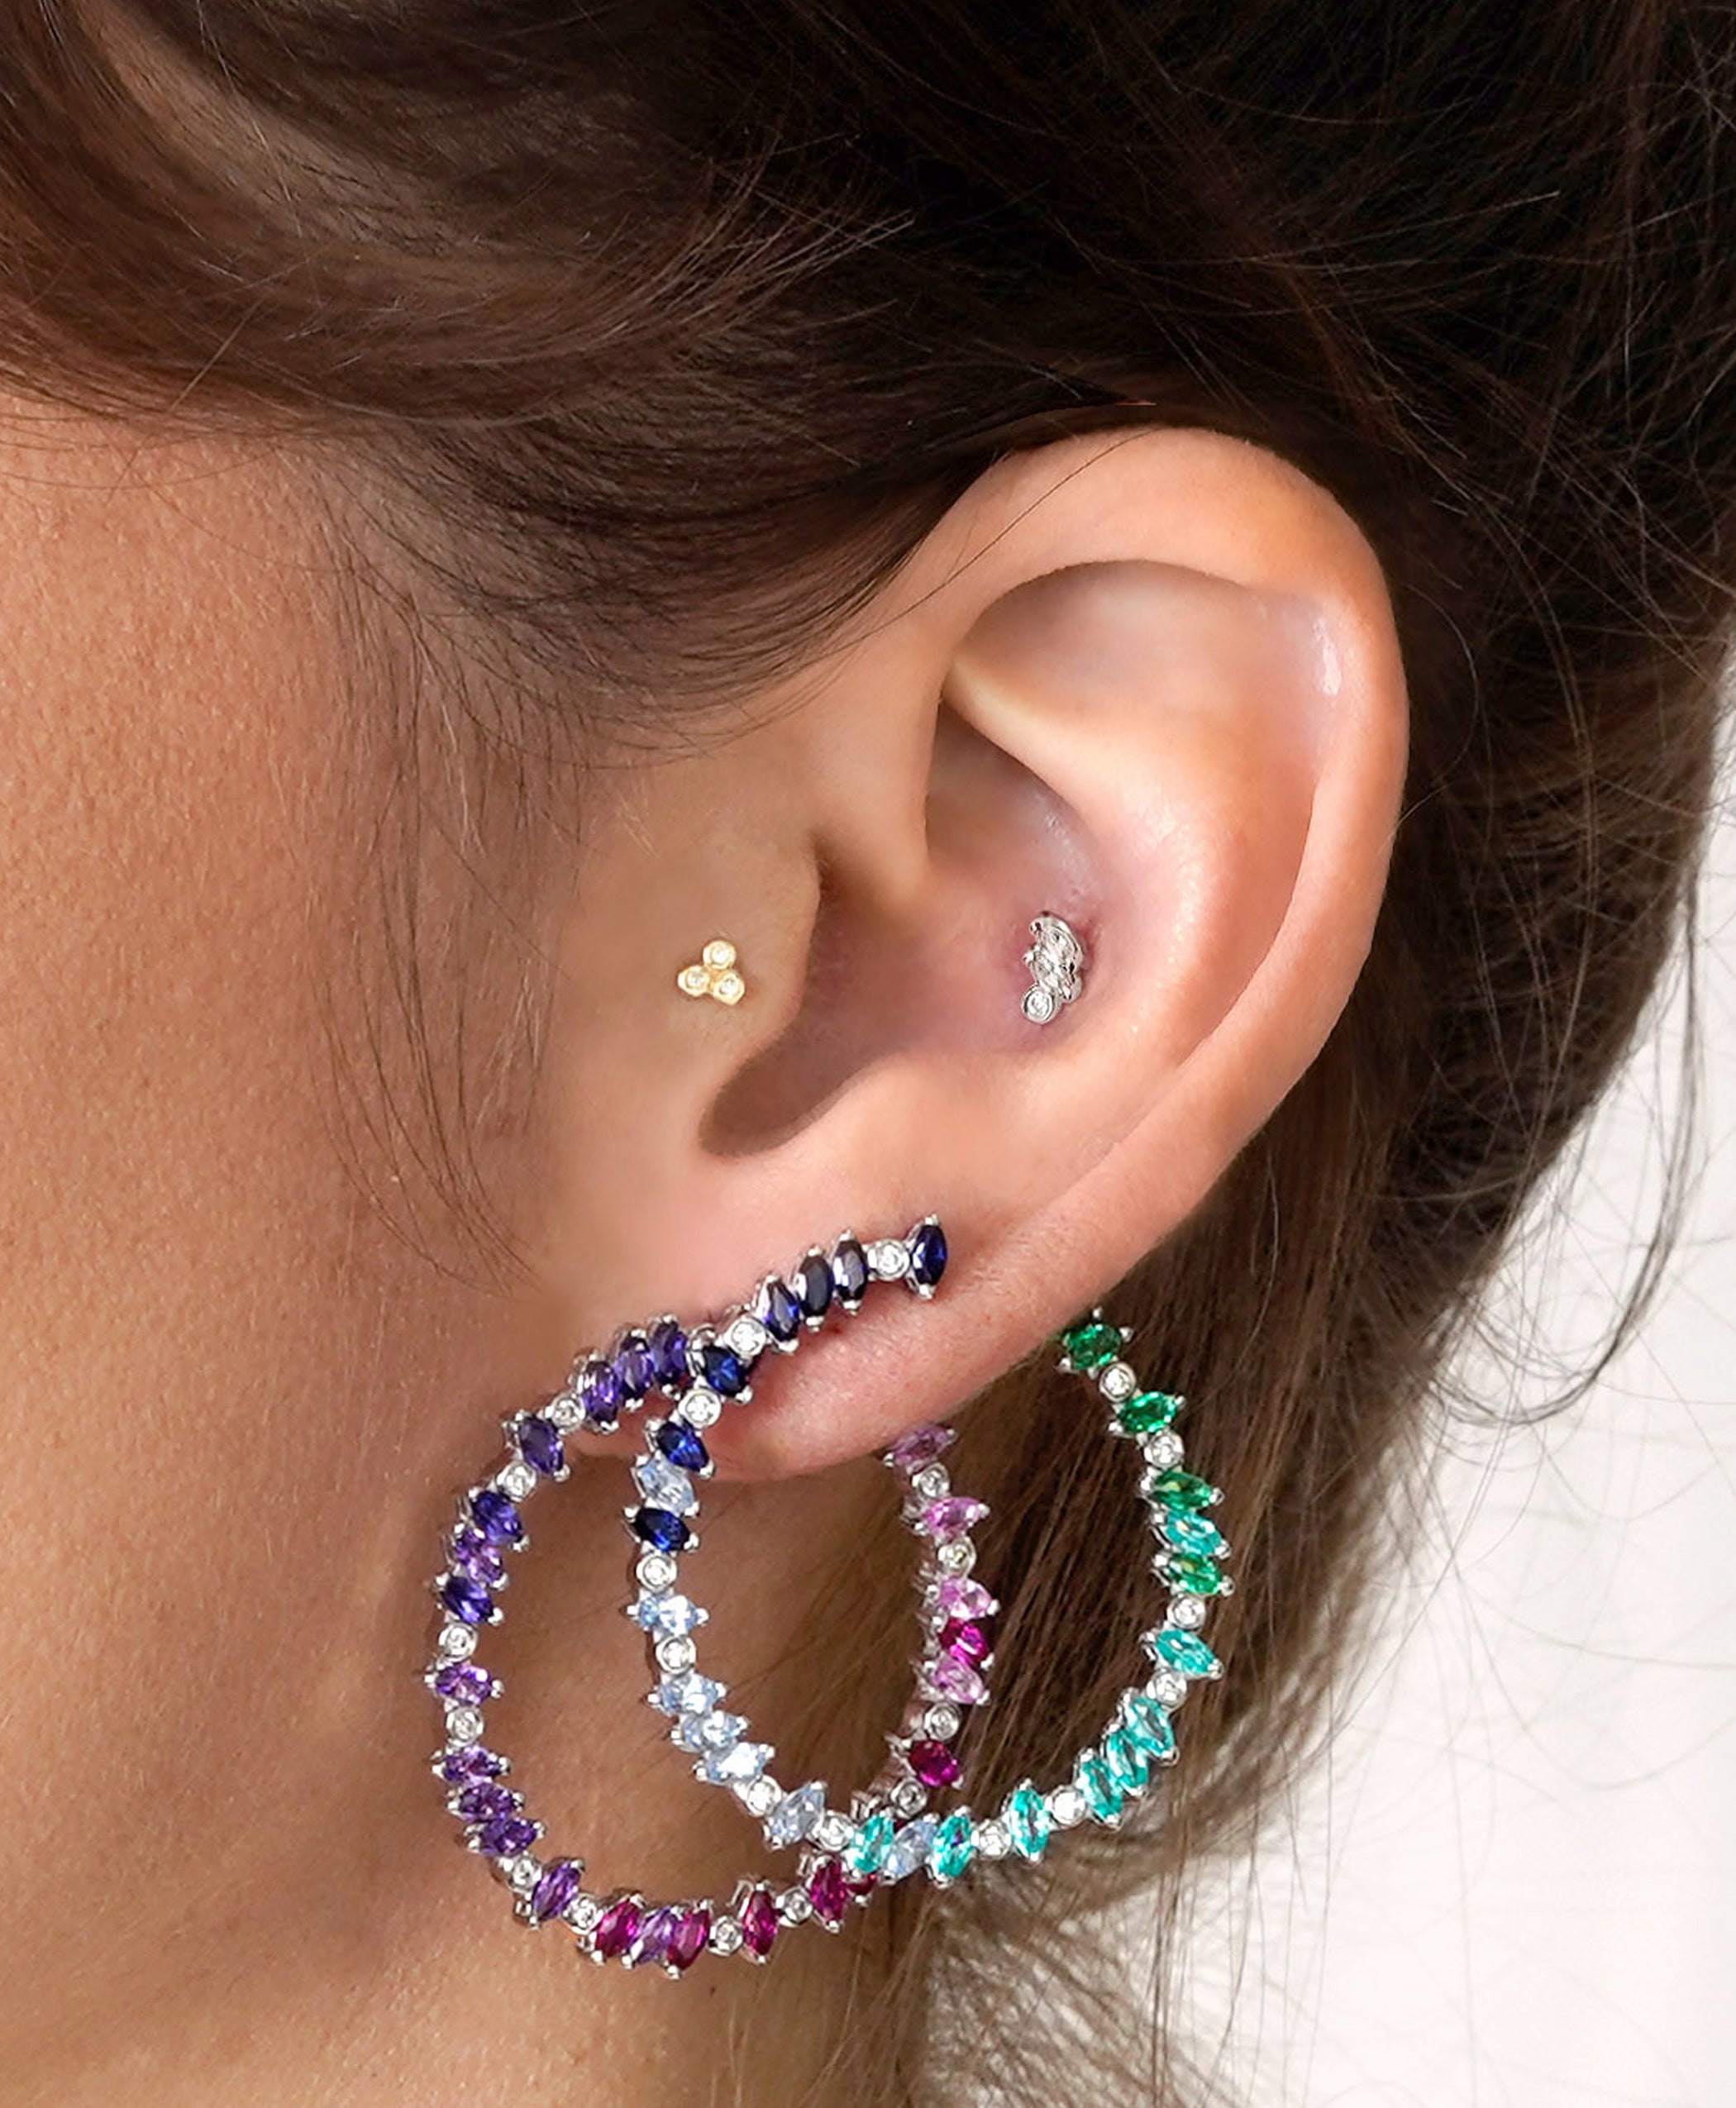 Veto Bright Sapphire, Spinel, Emerald and Diamond Hoops